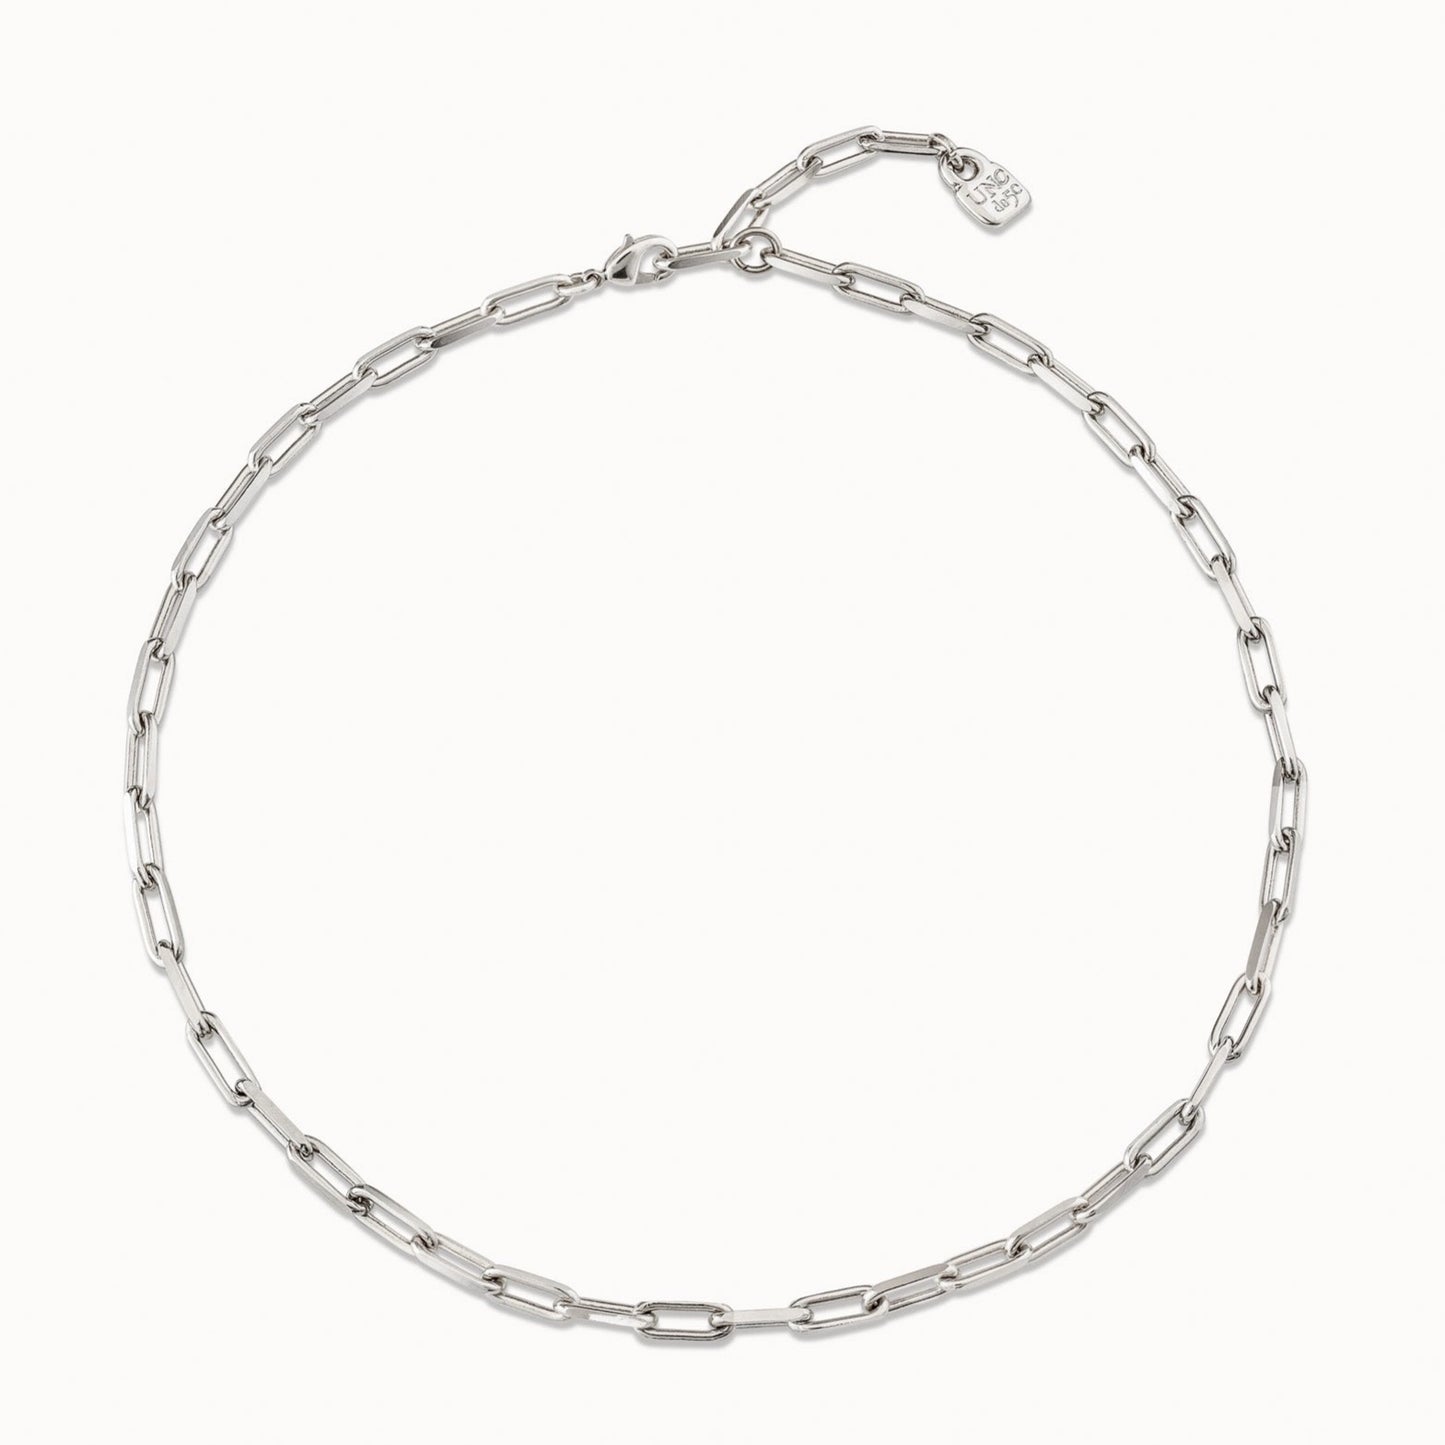 Short Silver Chain Necklace